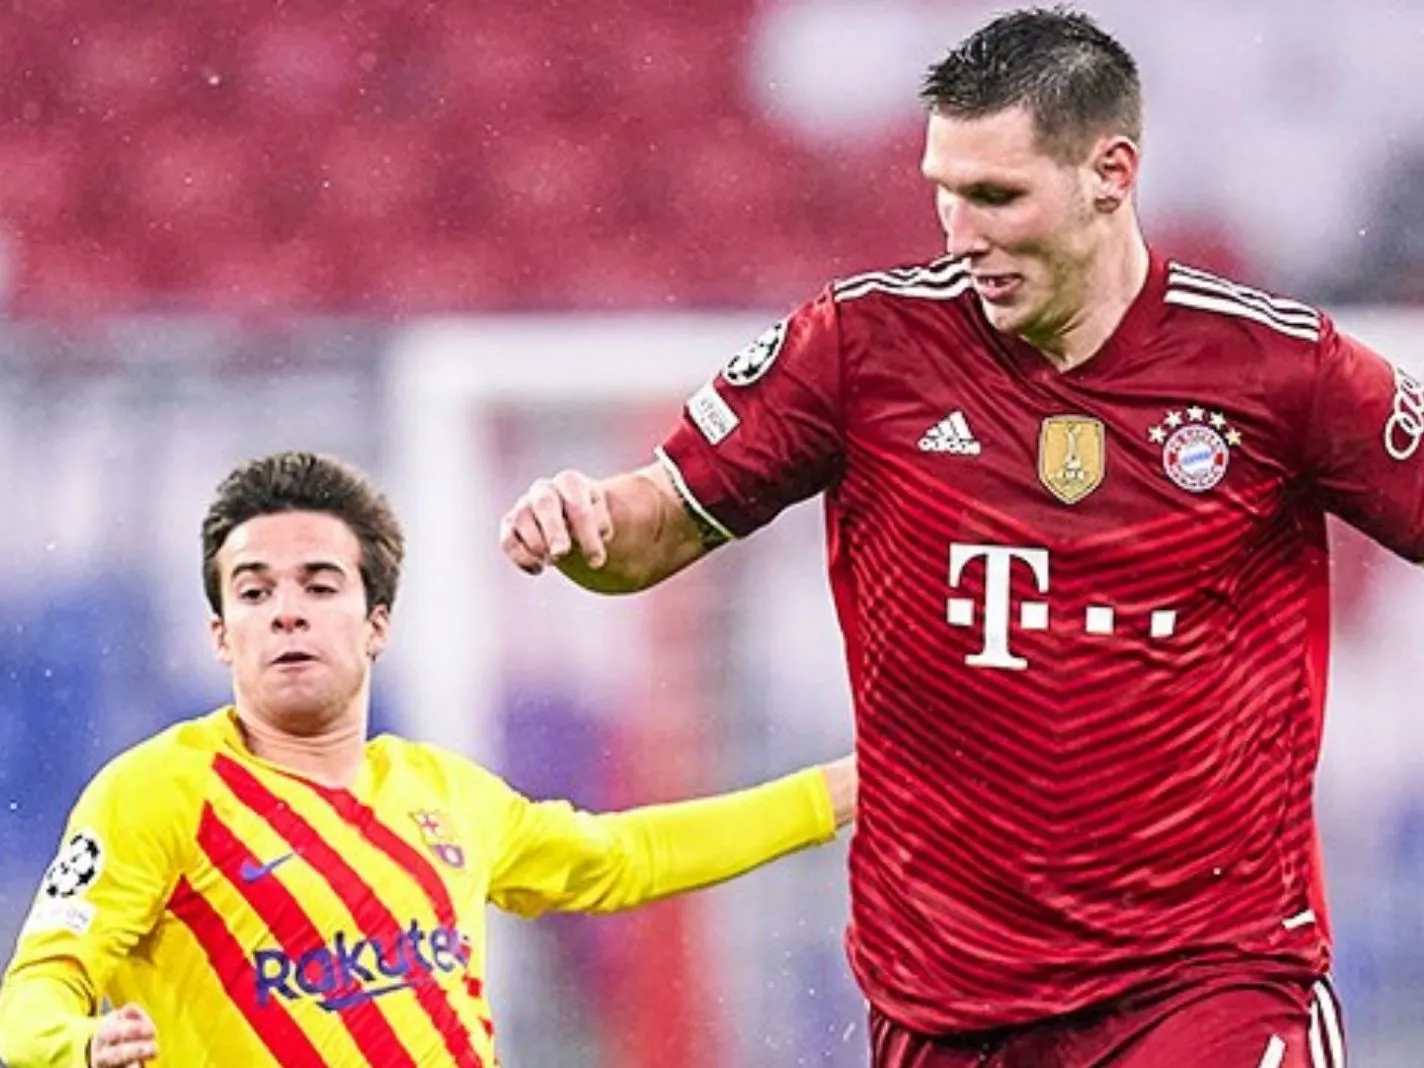 Riqui Puig appears tiny in front of Niklas Sule in bizarre photo from Bayern and Barcelona game